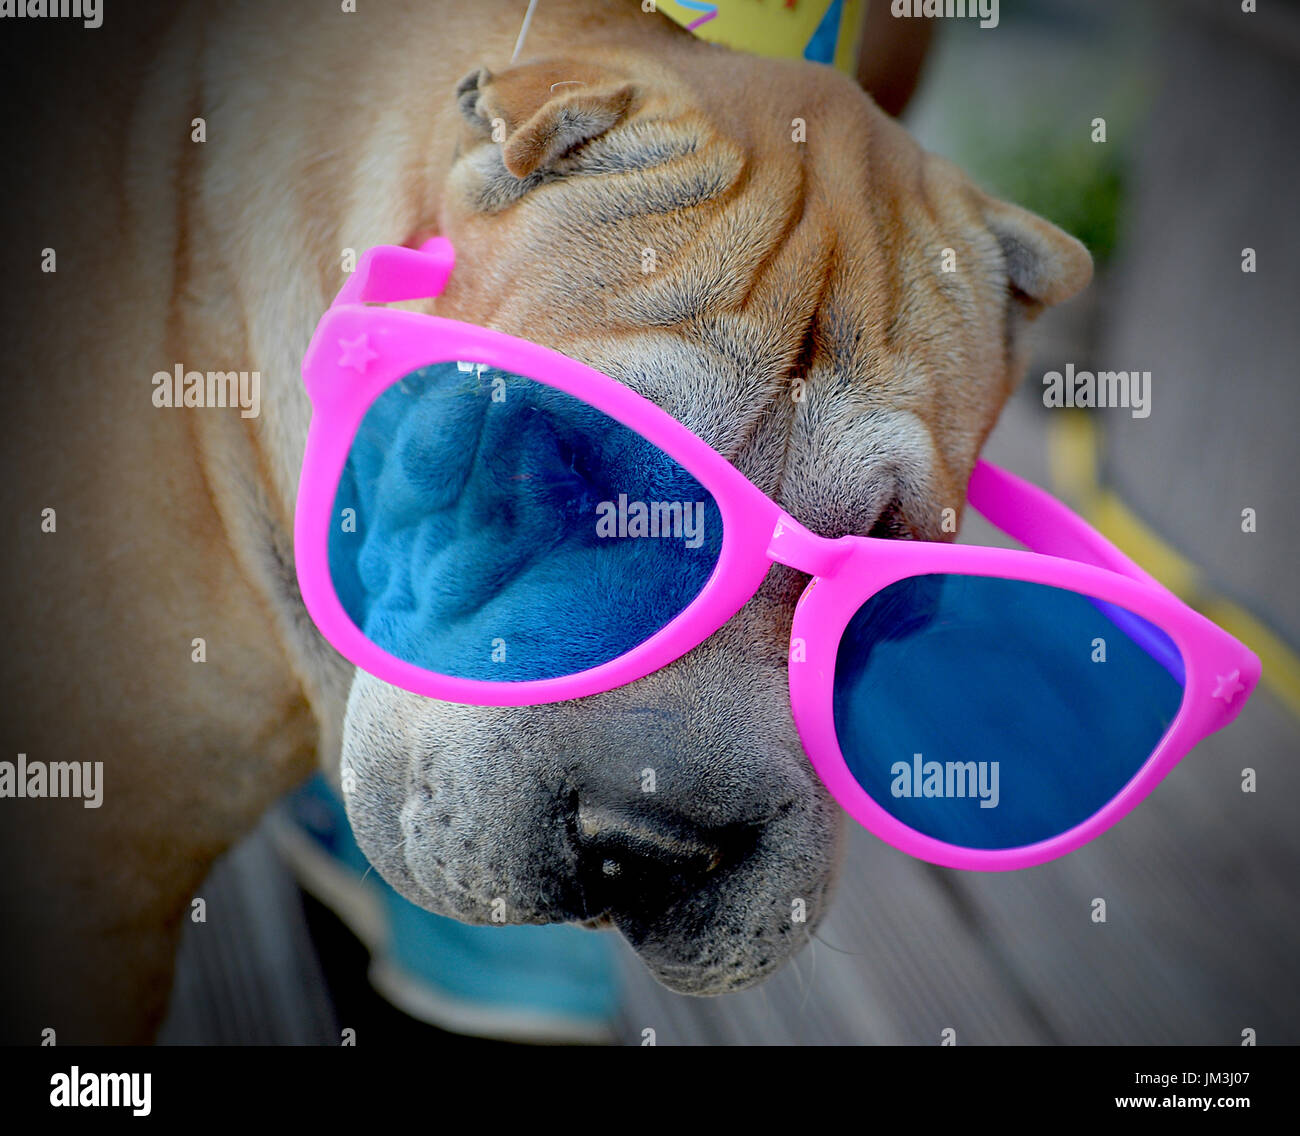 dog portrait with pink sunglasses Stock Photo